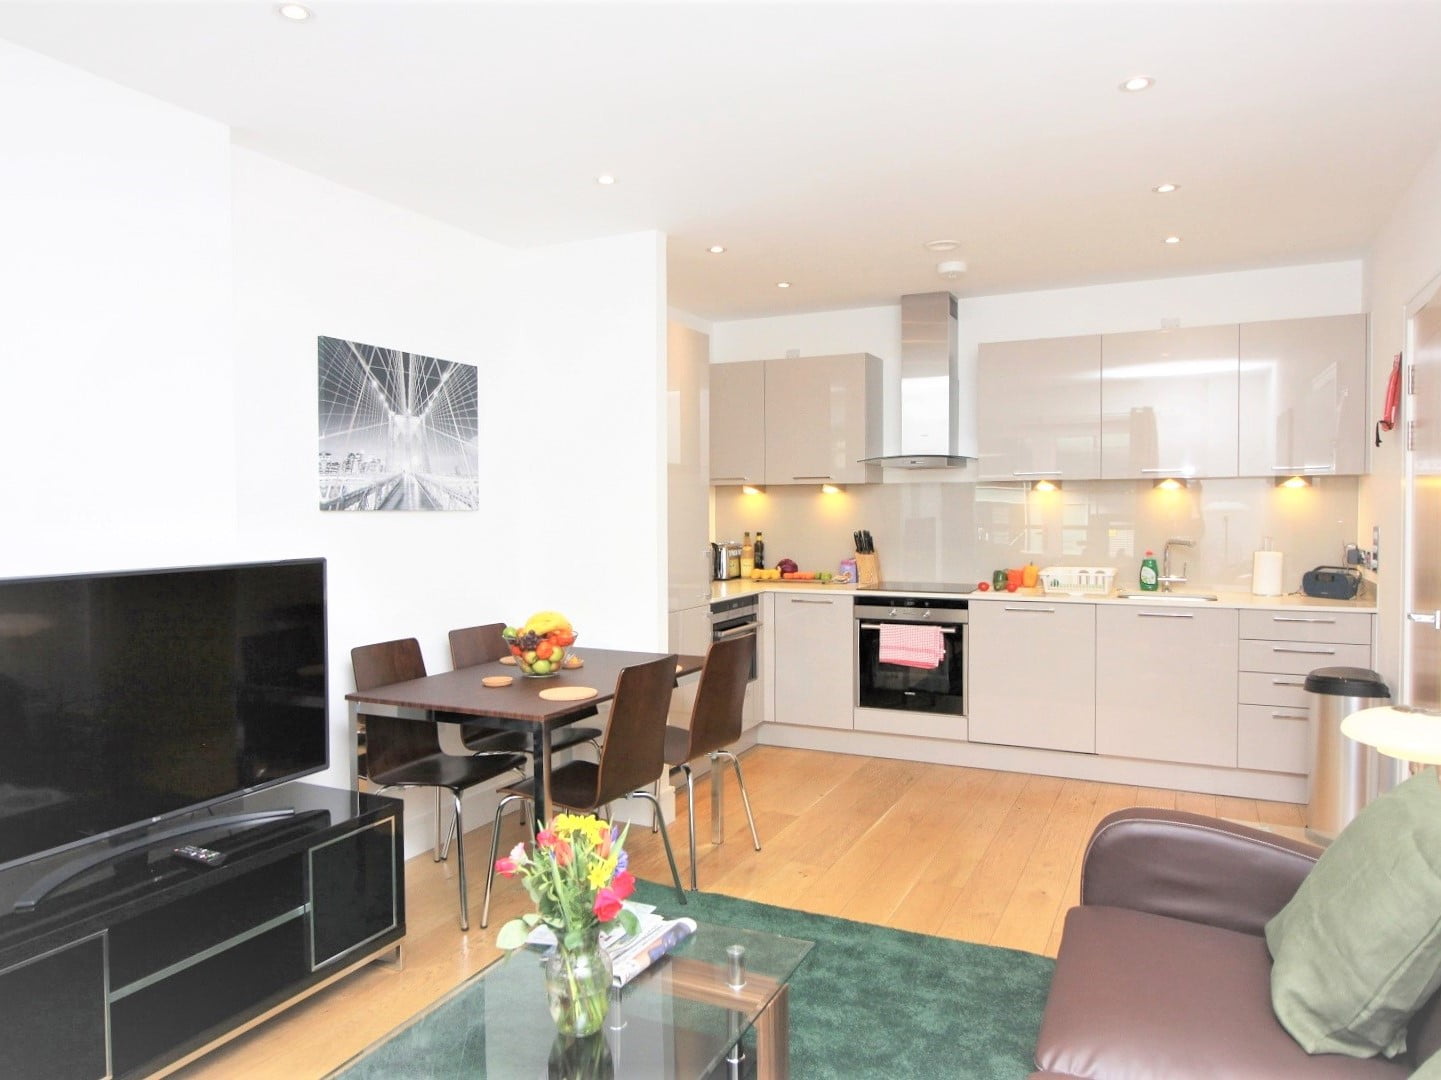 West-London-Serviced-Apartments---Skerne-Road-Free-Wifi-Balcony-Parking-Apartments---Urban-Stay